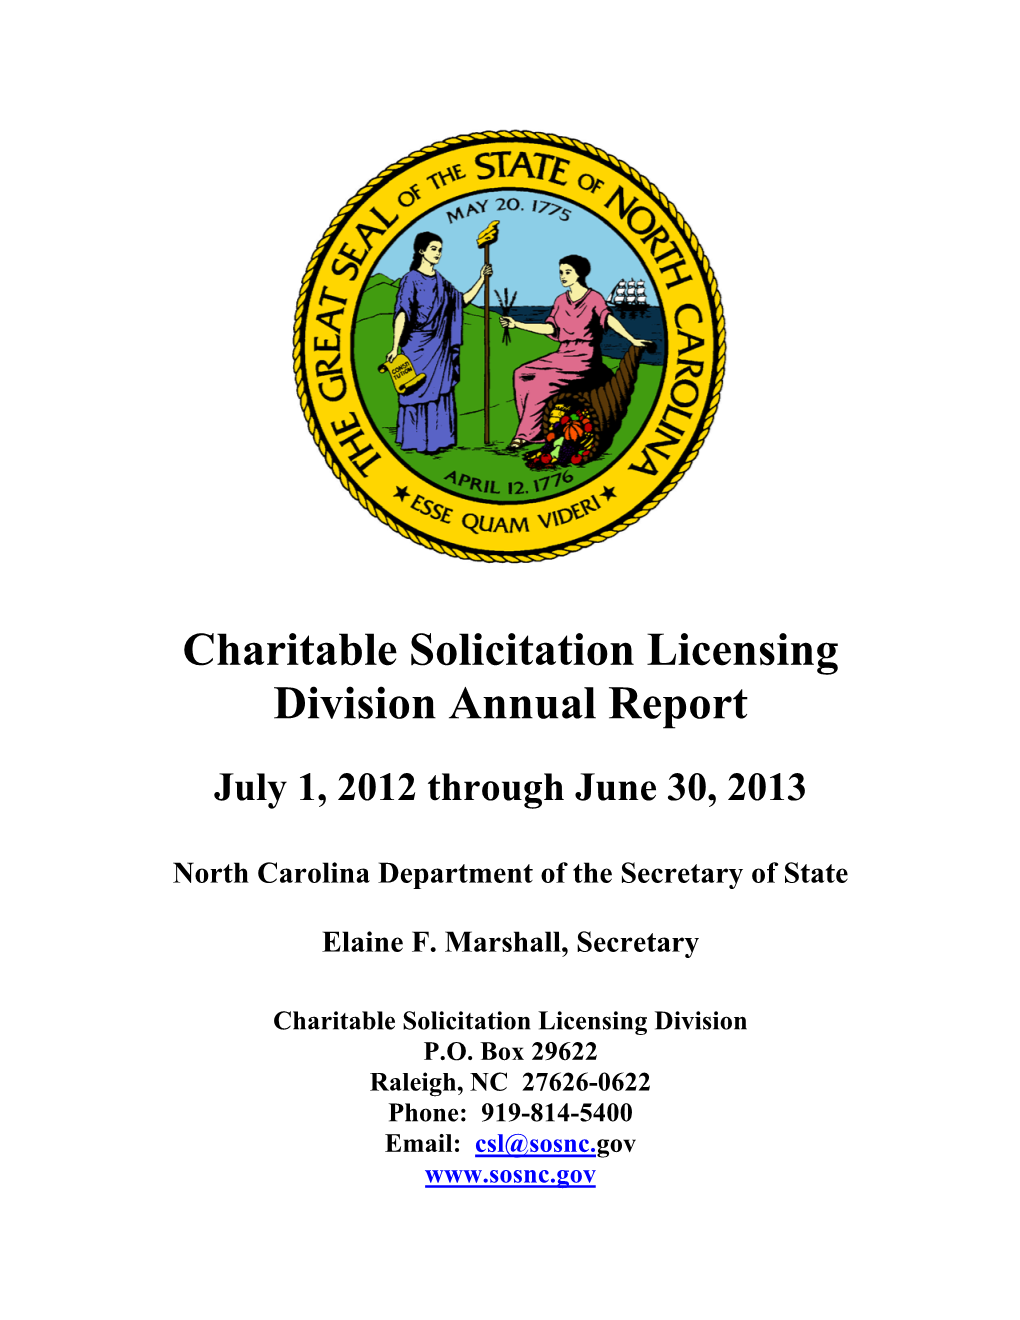 Charitable Solicitation Licensing Division Annual Report July 1, 2012 Through June 30, 2013